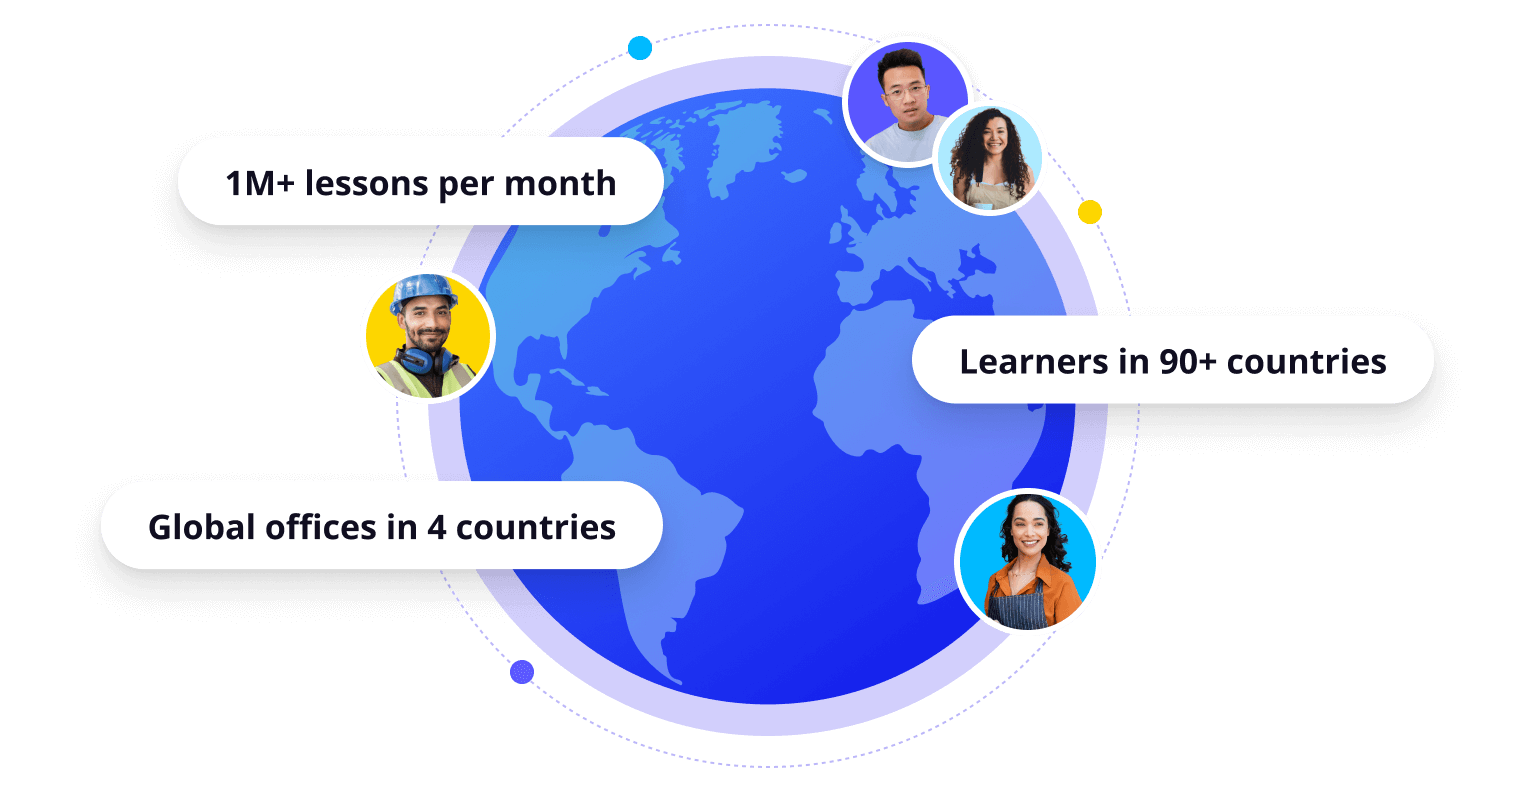 1M+ lessons per month; Learners in 90+countires; Global offices in 4 countries